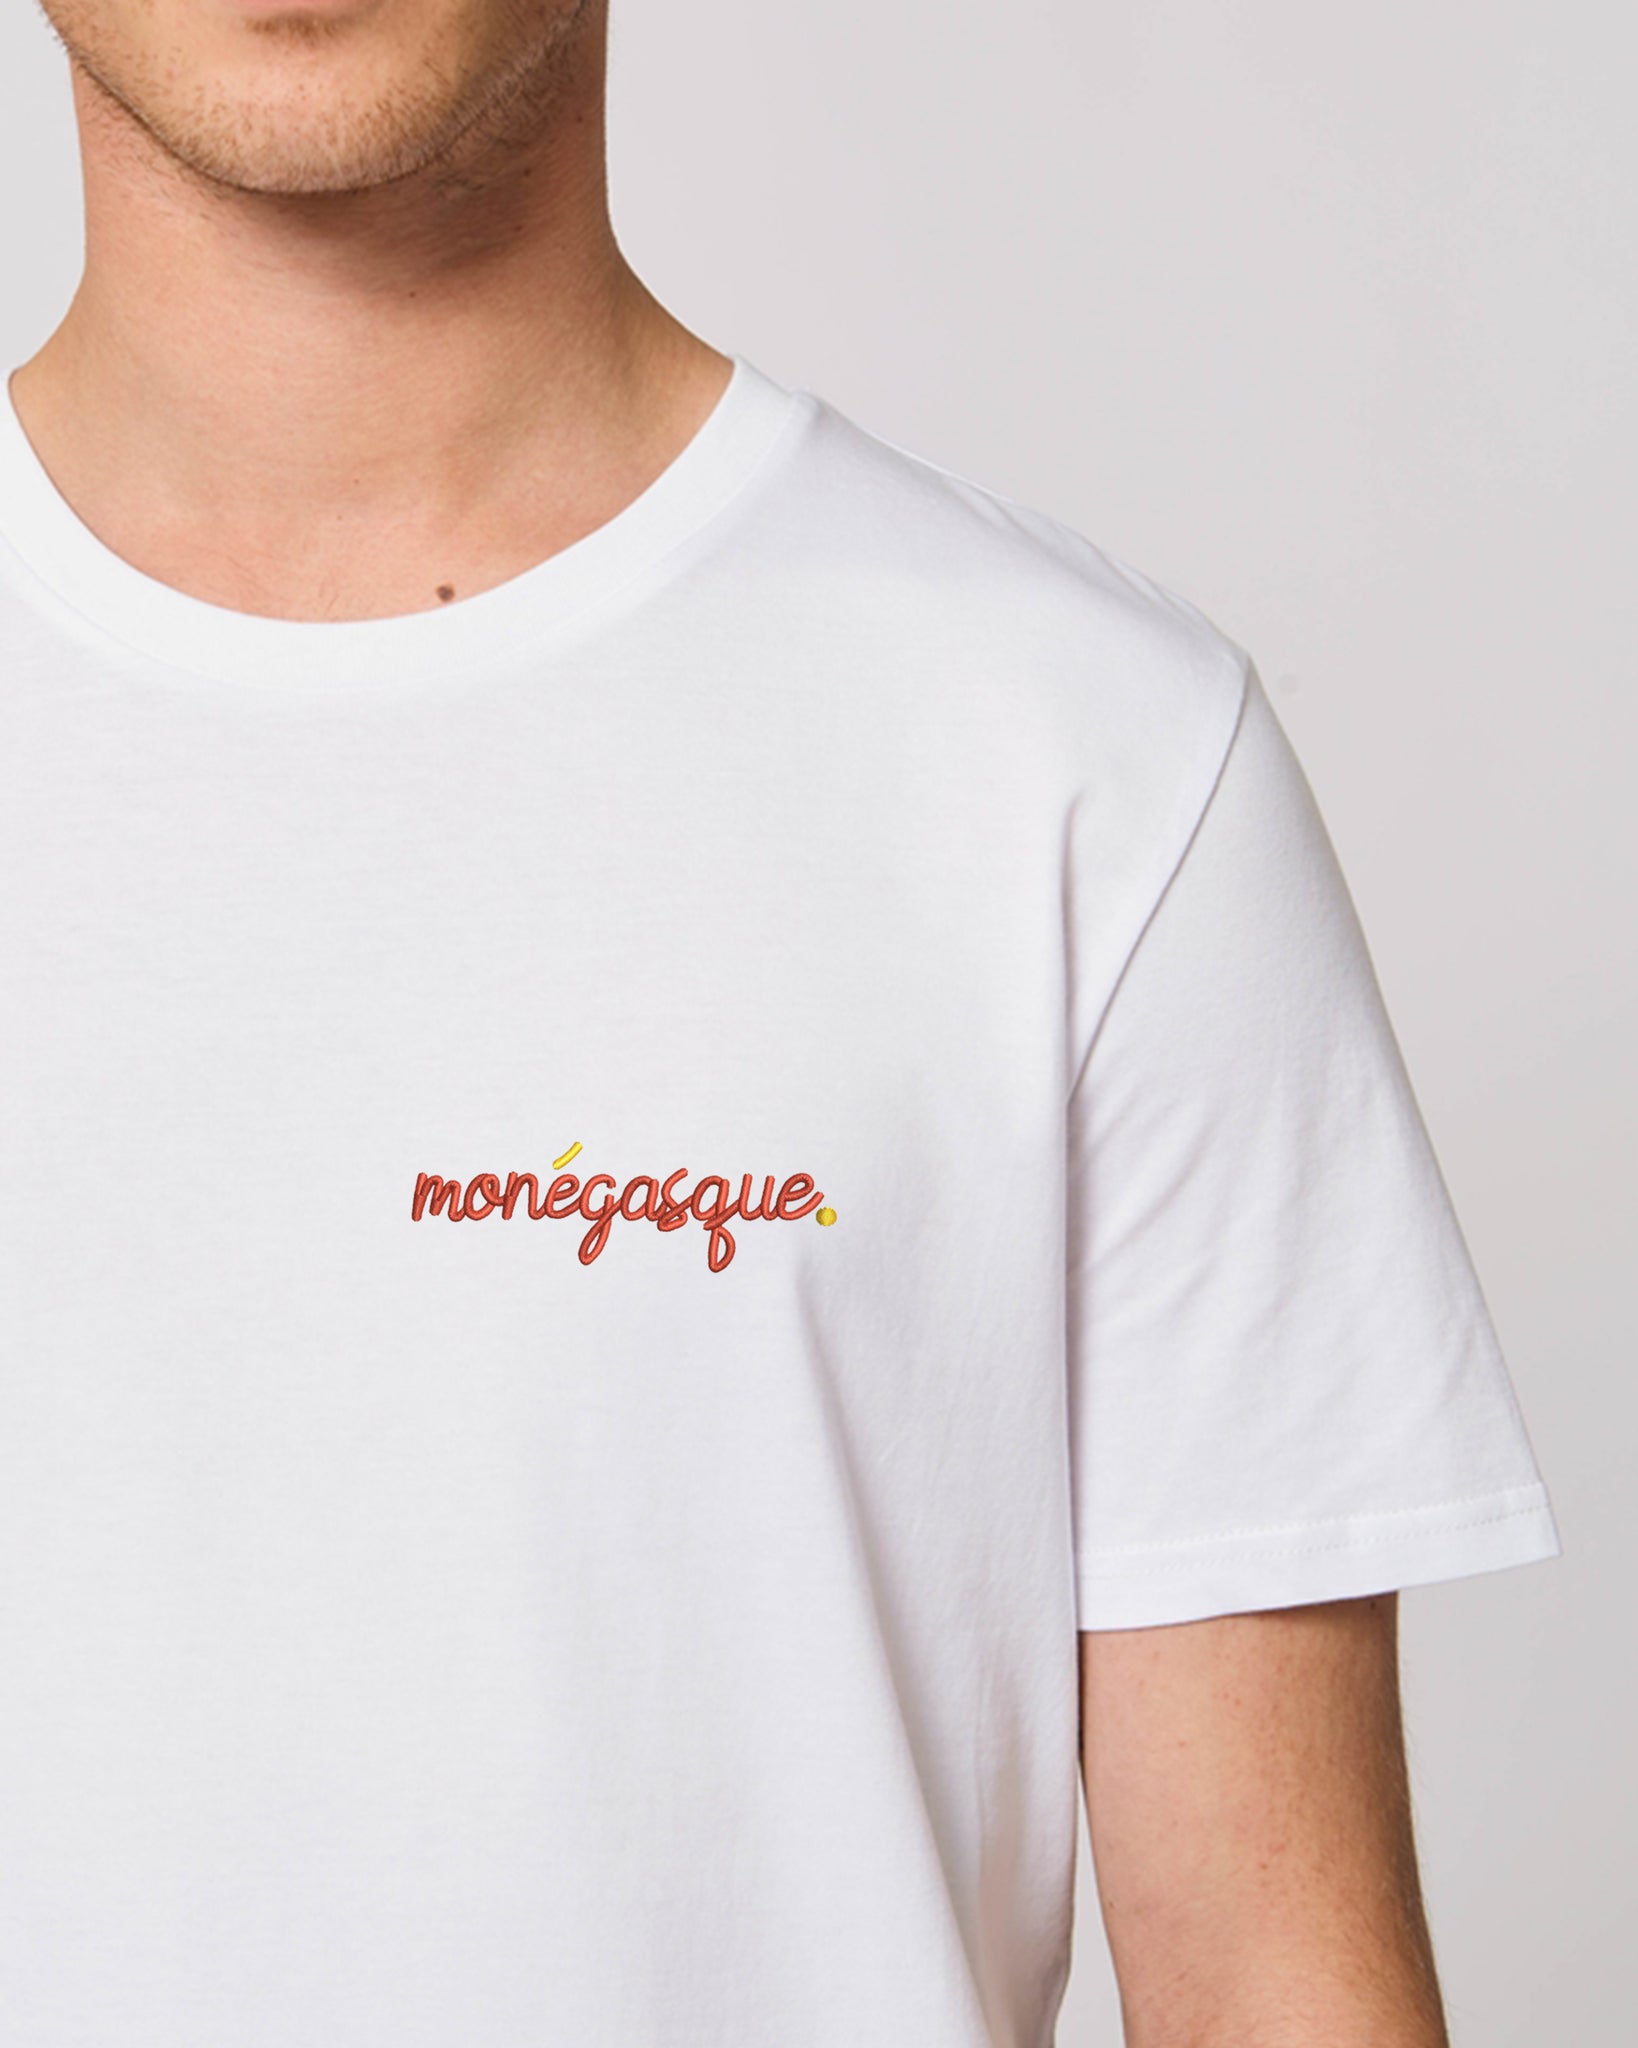 Monegasque Embroidered Tee Shirt